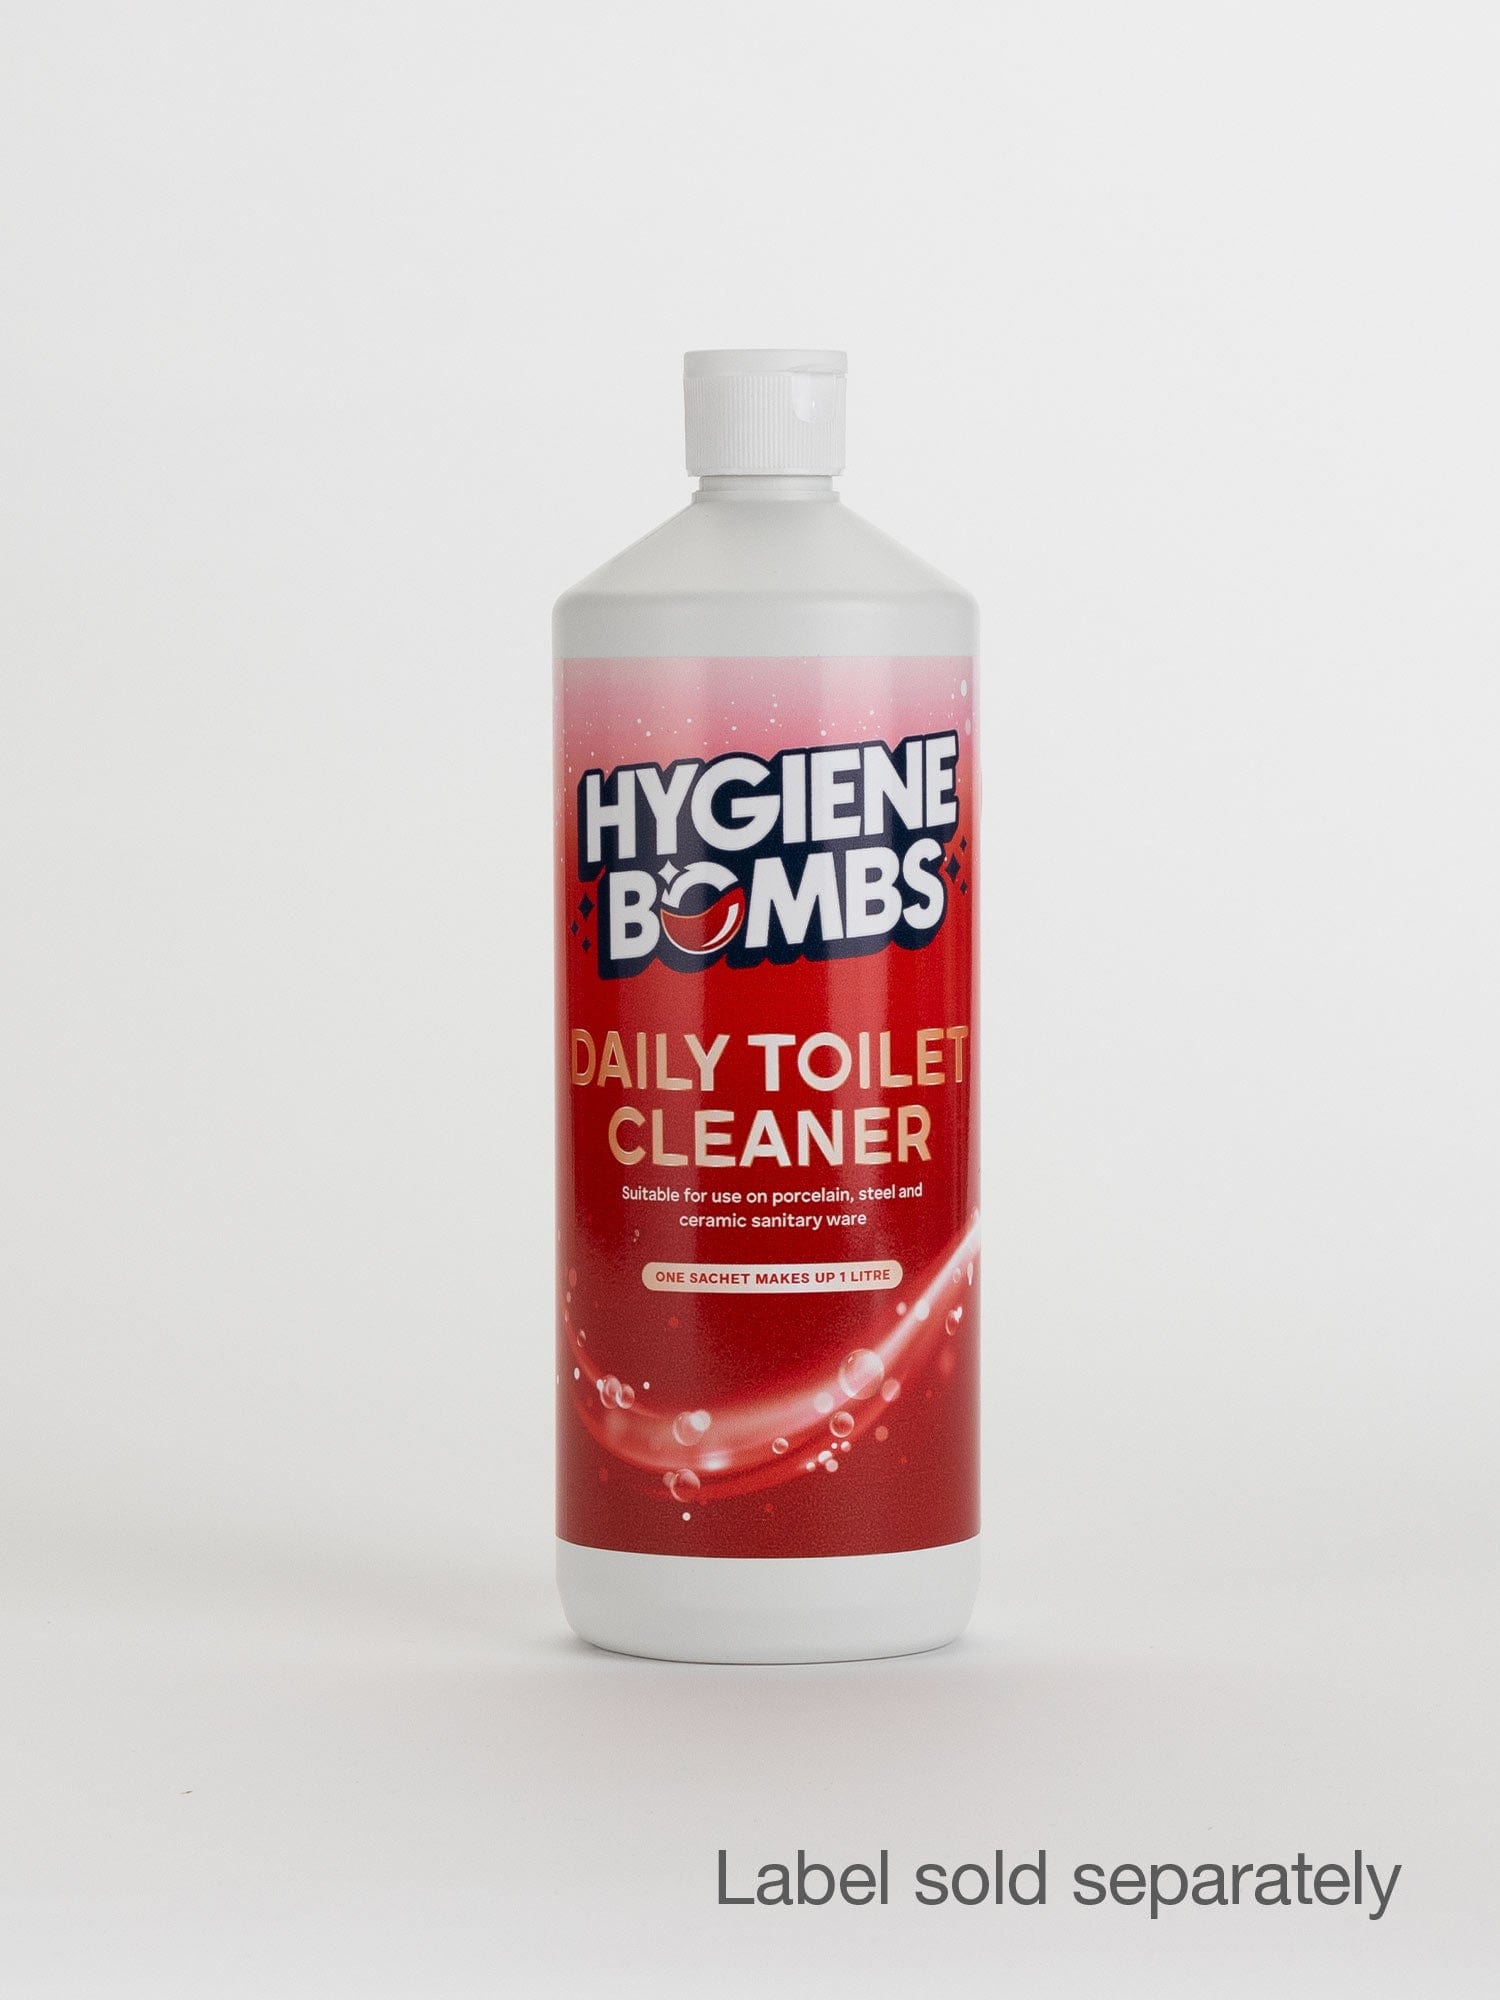 daily toilet cleaner bottle with label